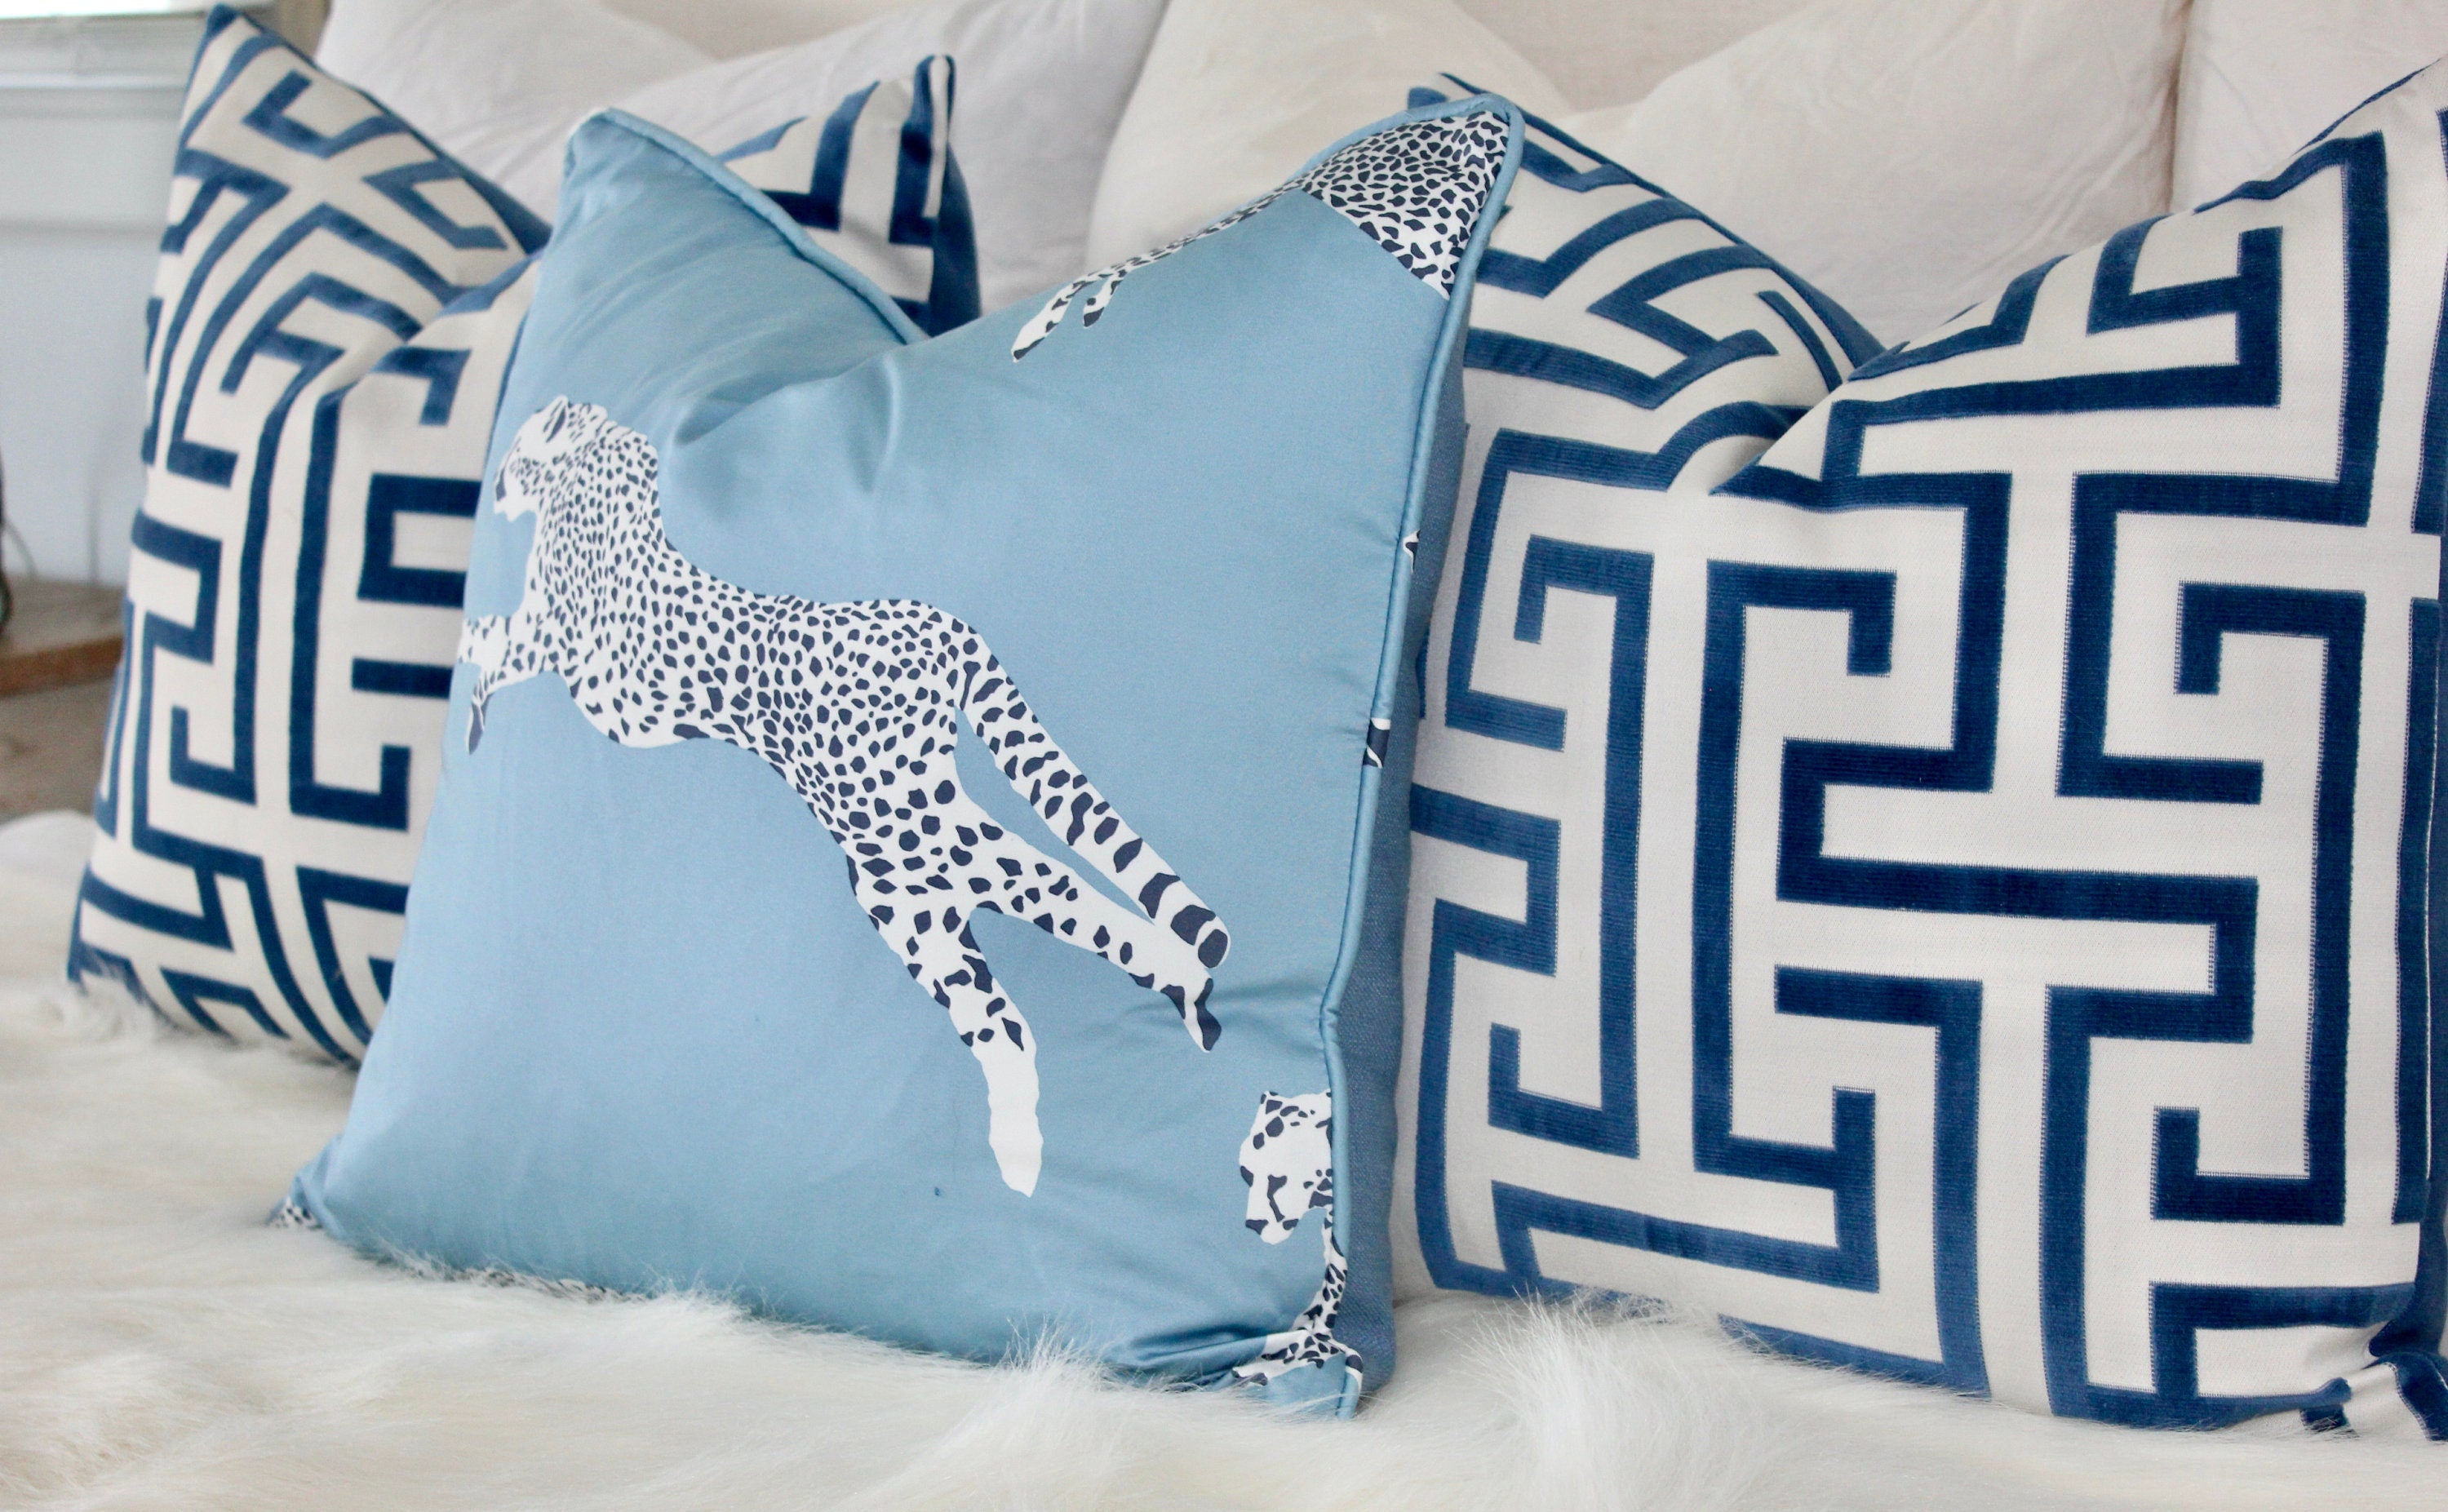 Leaping Cheetah Pillow in Blue. Lumbar Decorative Pillow Animal Print Decor, accent cushion,  high end pillow cover, exotic pillow cover